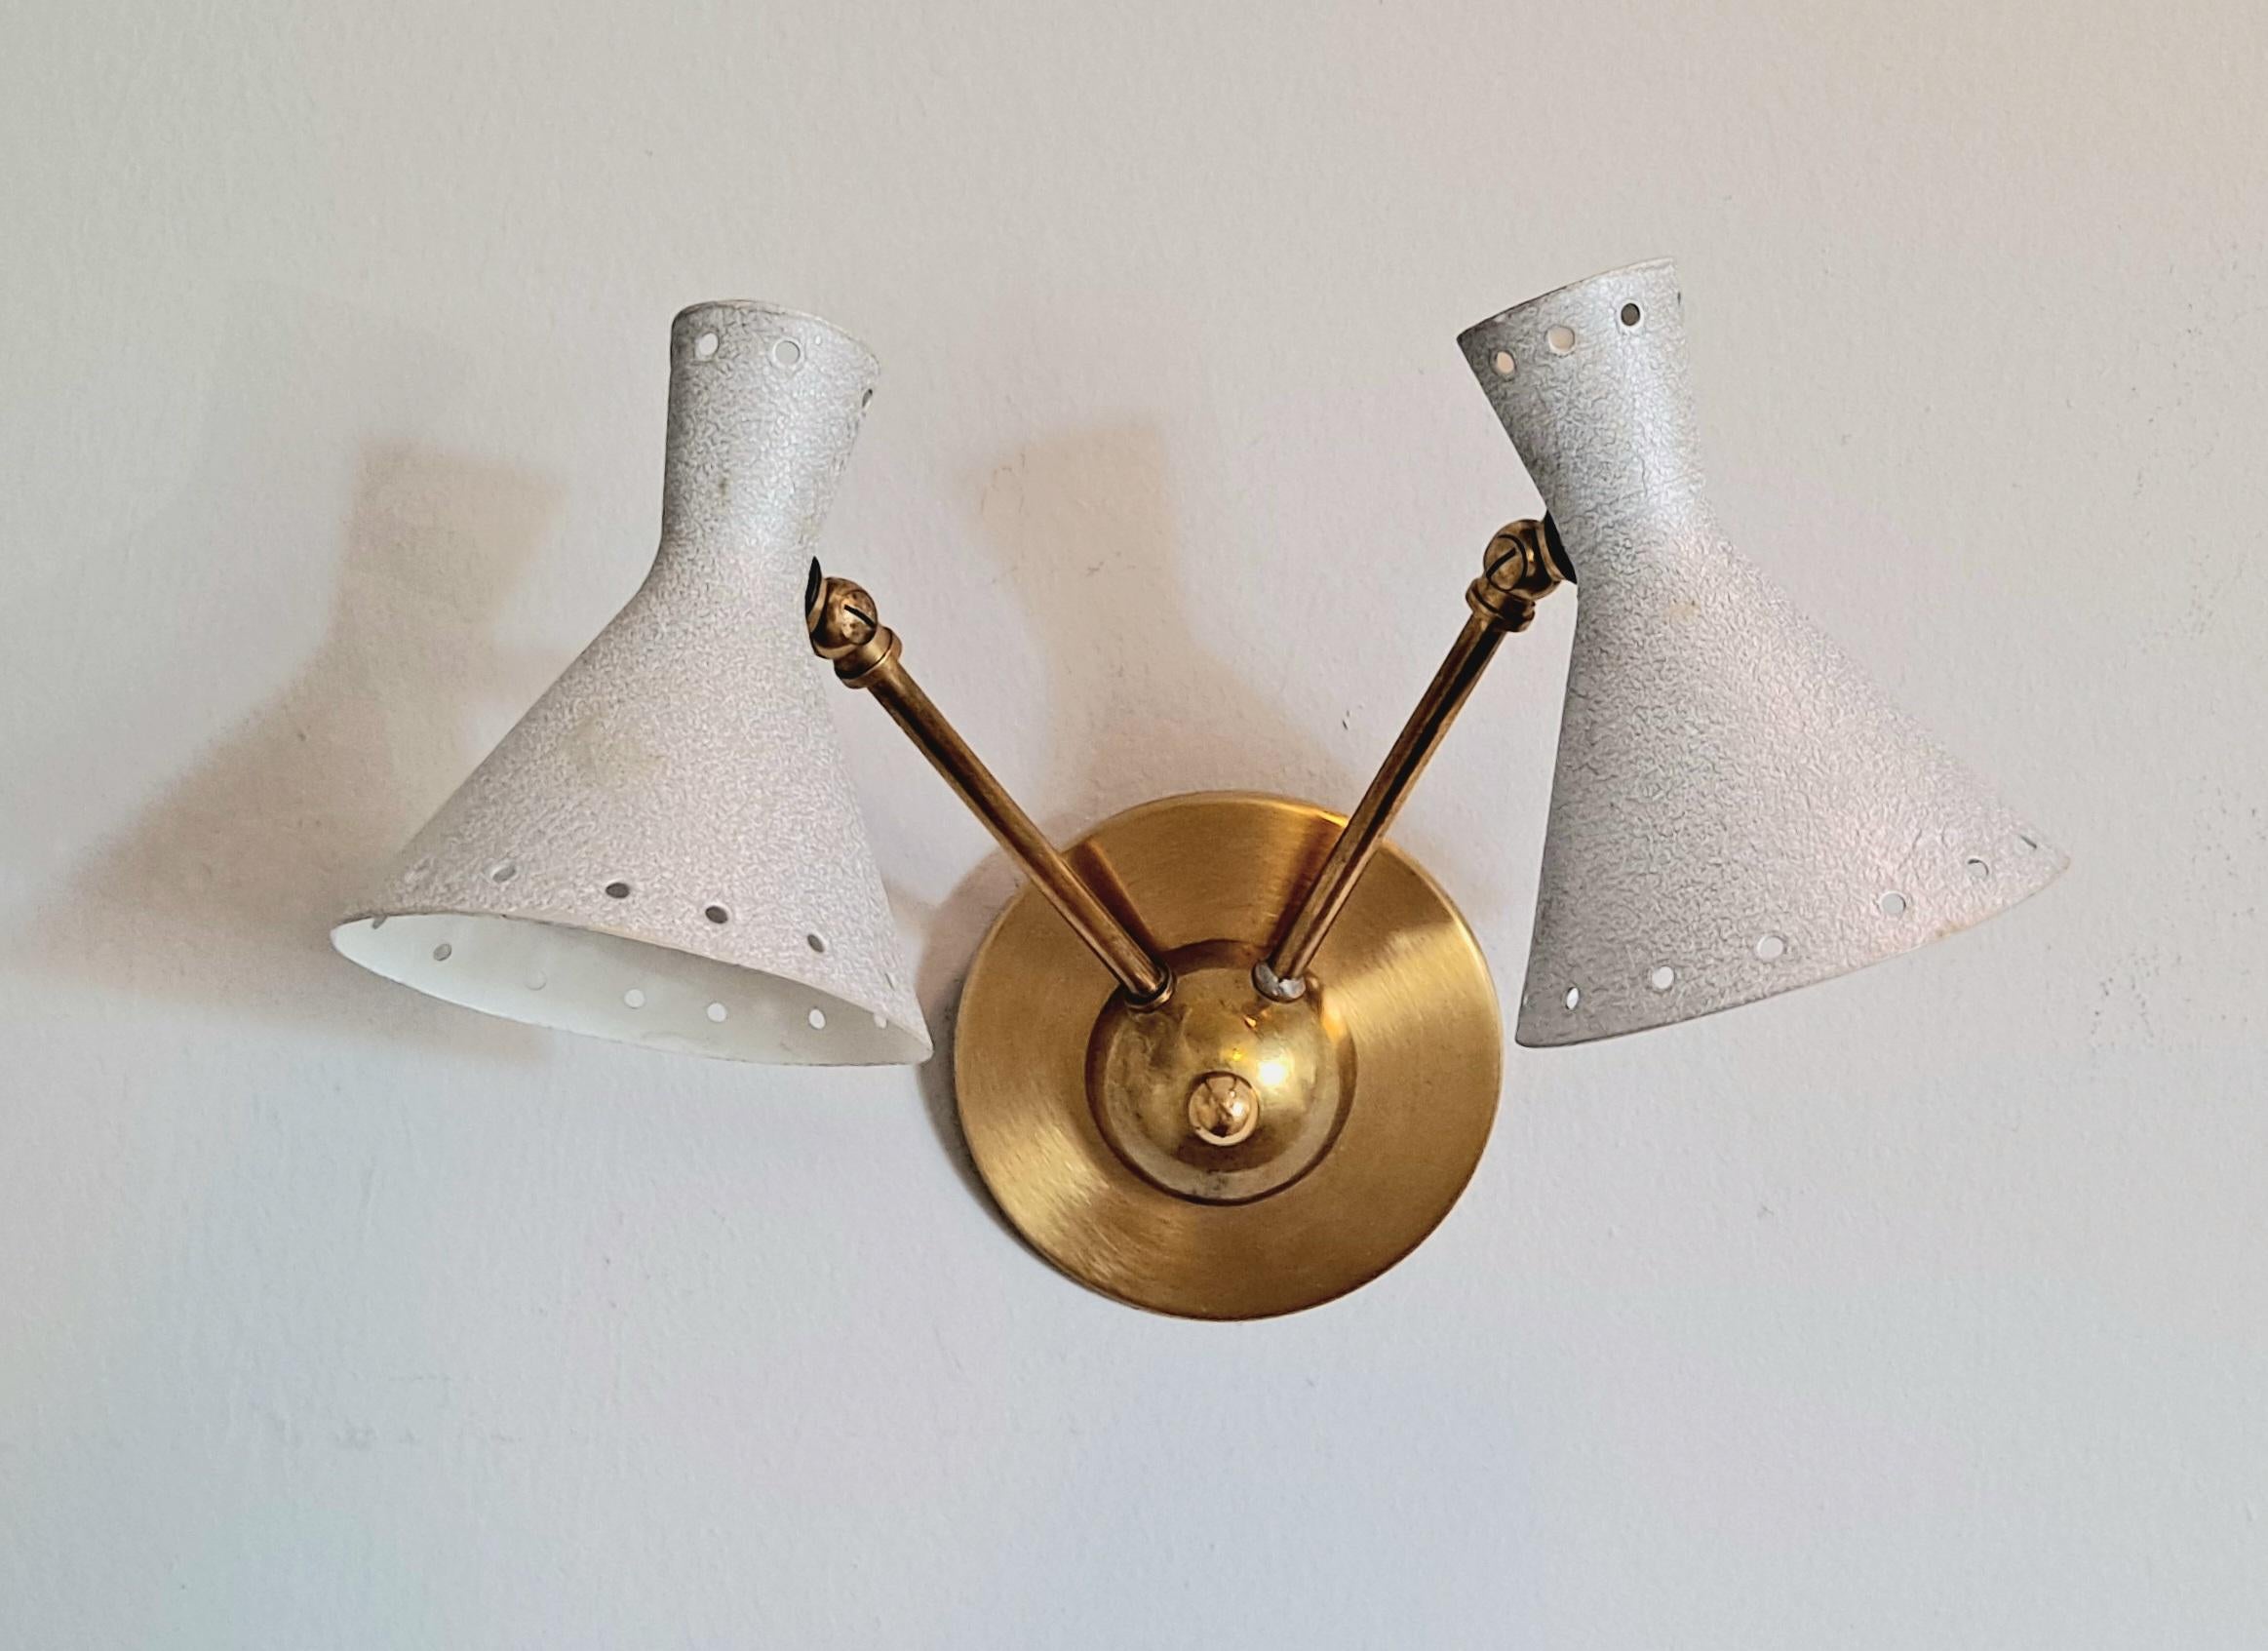 The conical wall lights are in off Silver color .The shades are supported by thin tubular brass supports that allow the shades to be maneuvered easily.  Pivoting shads helps to direct the light where you would like to be pointed.
 